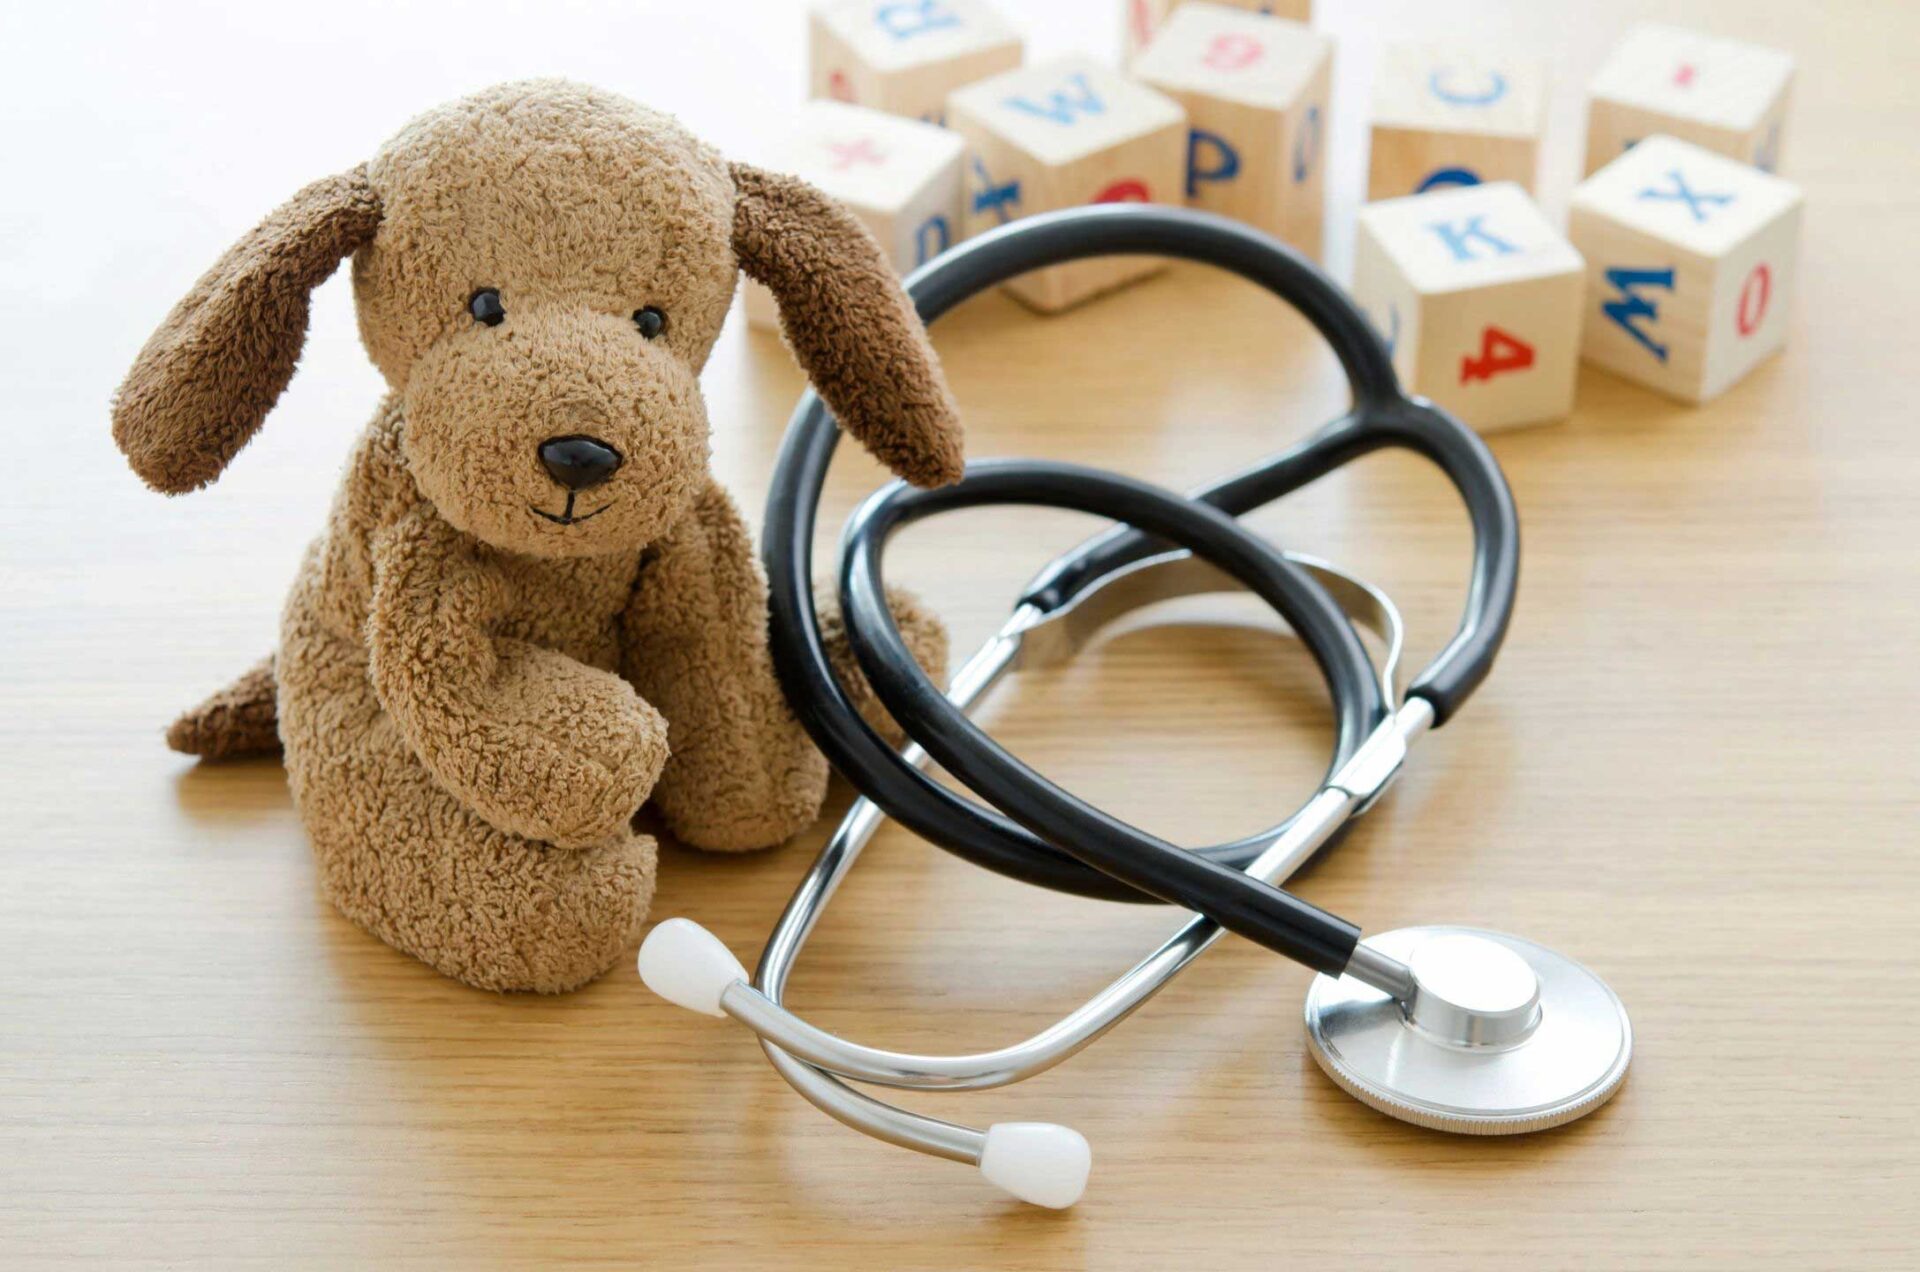 A stethoscope and a teddy bear on top of a table.